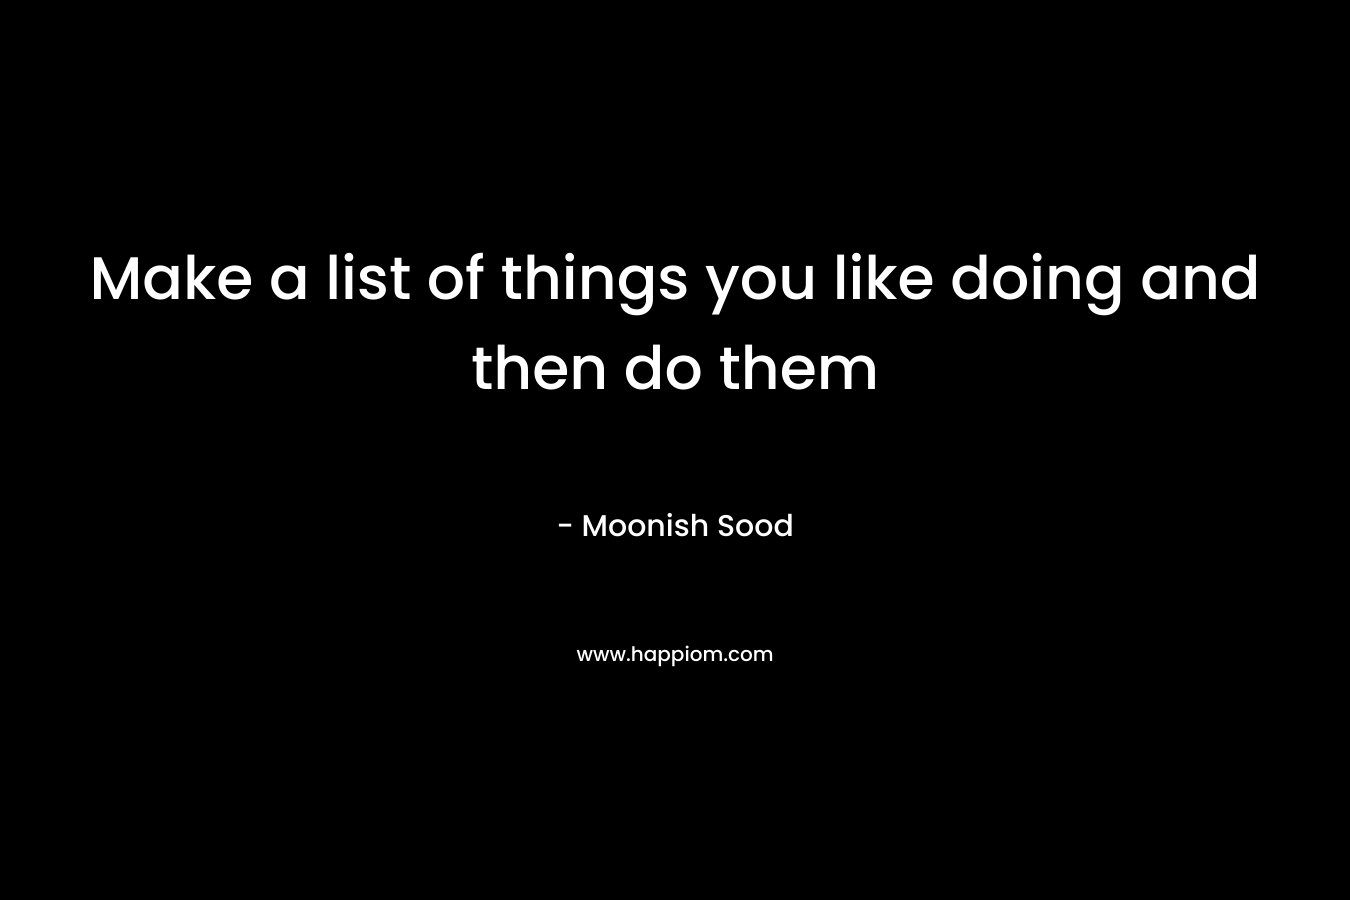 Make a list of things you like doing and then do them